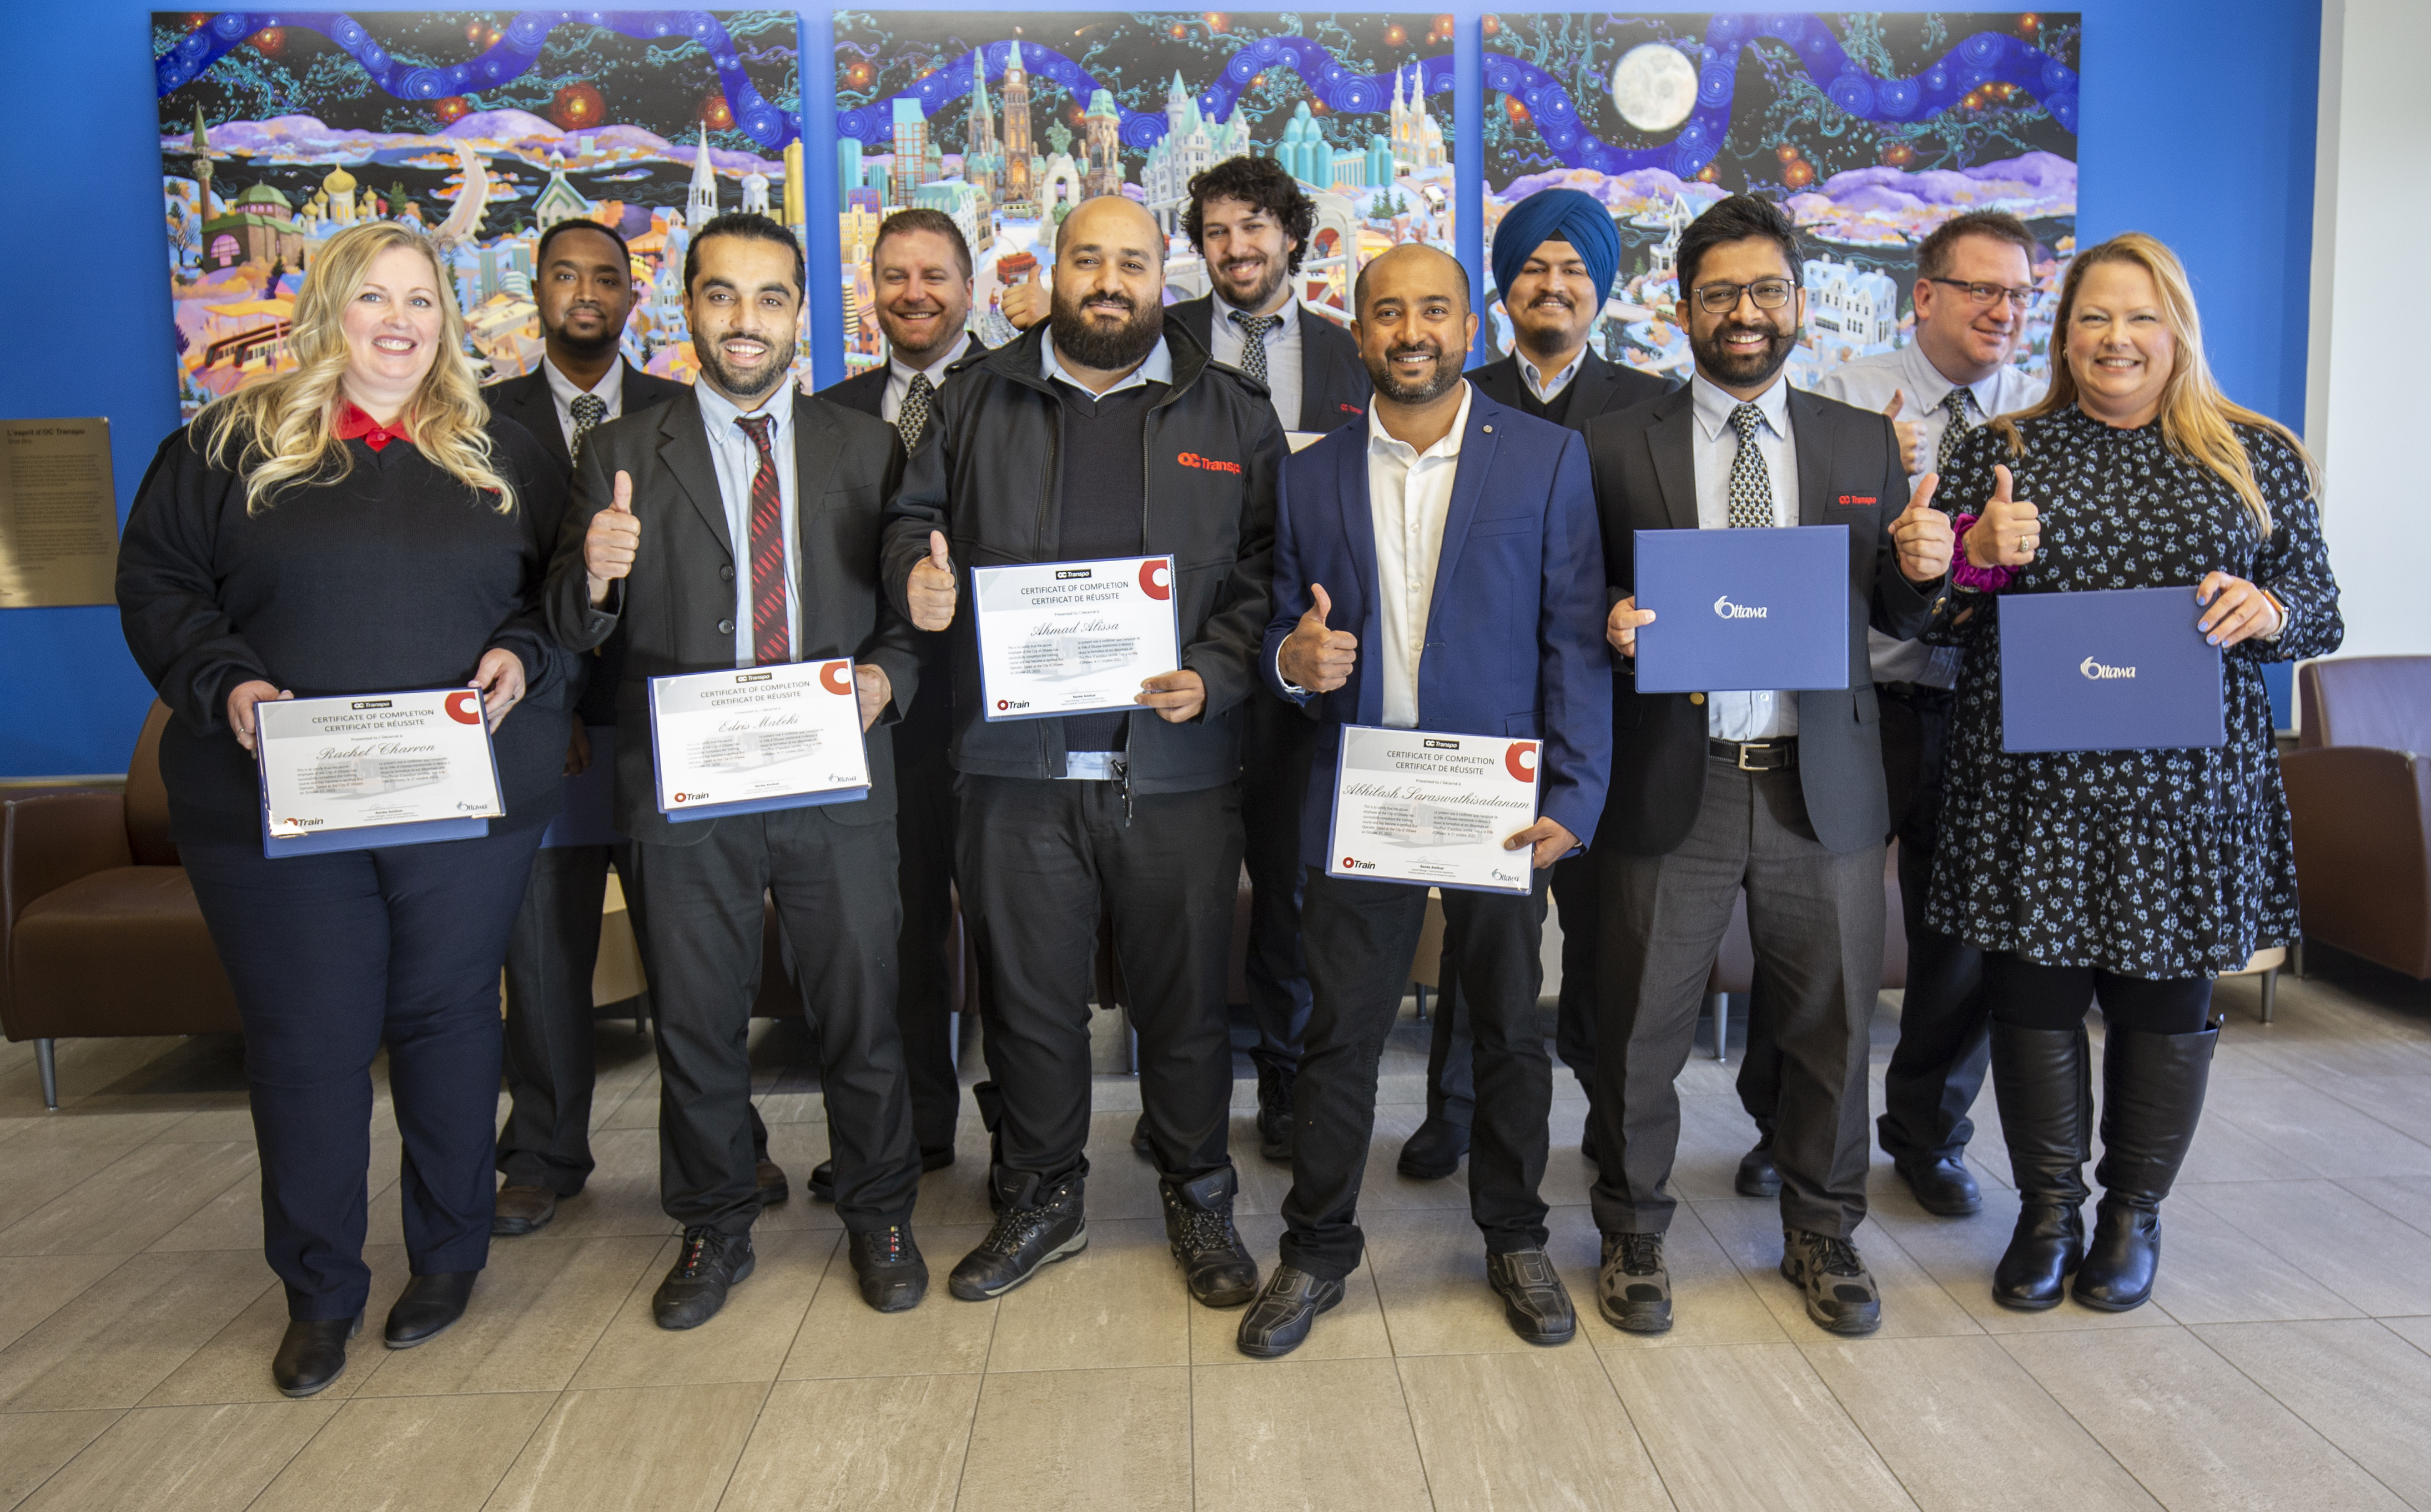 Image - OC Transpo’s newest Bus Operators are ready to hit the road